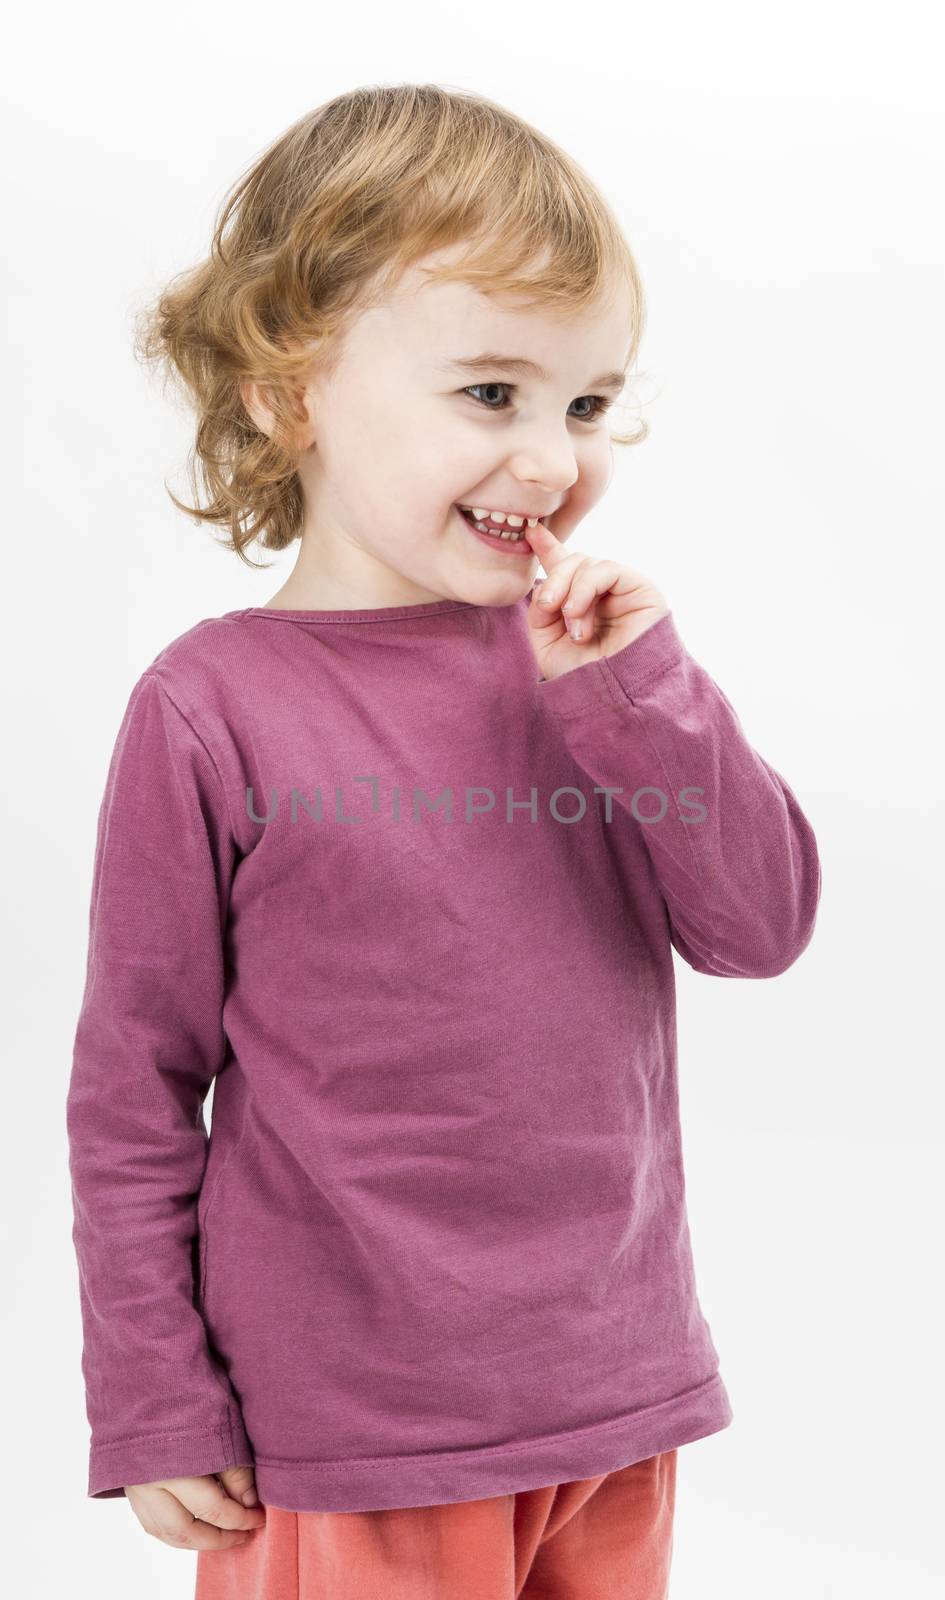 abashed caucasian girl looking to side. vertical image in light grey background